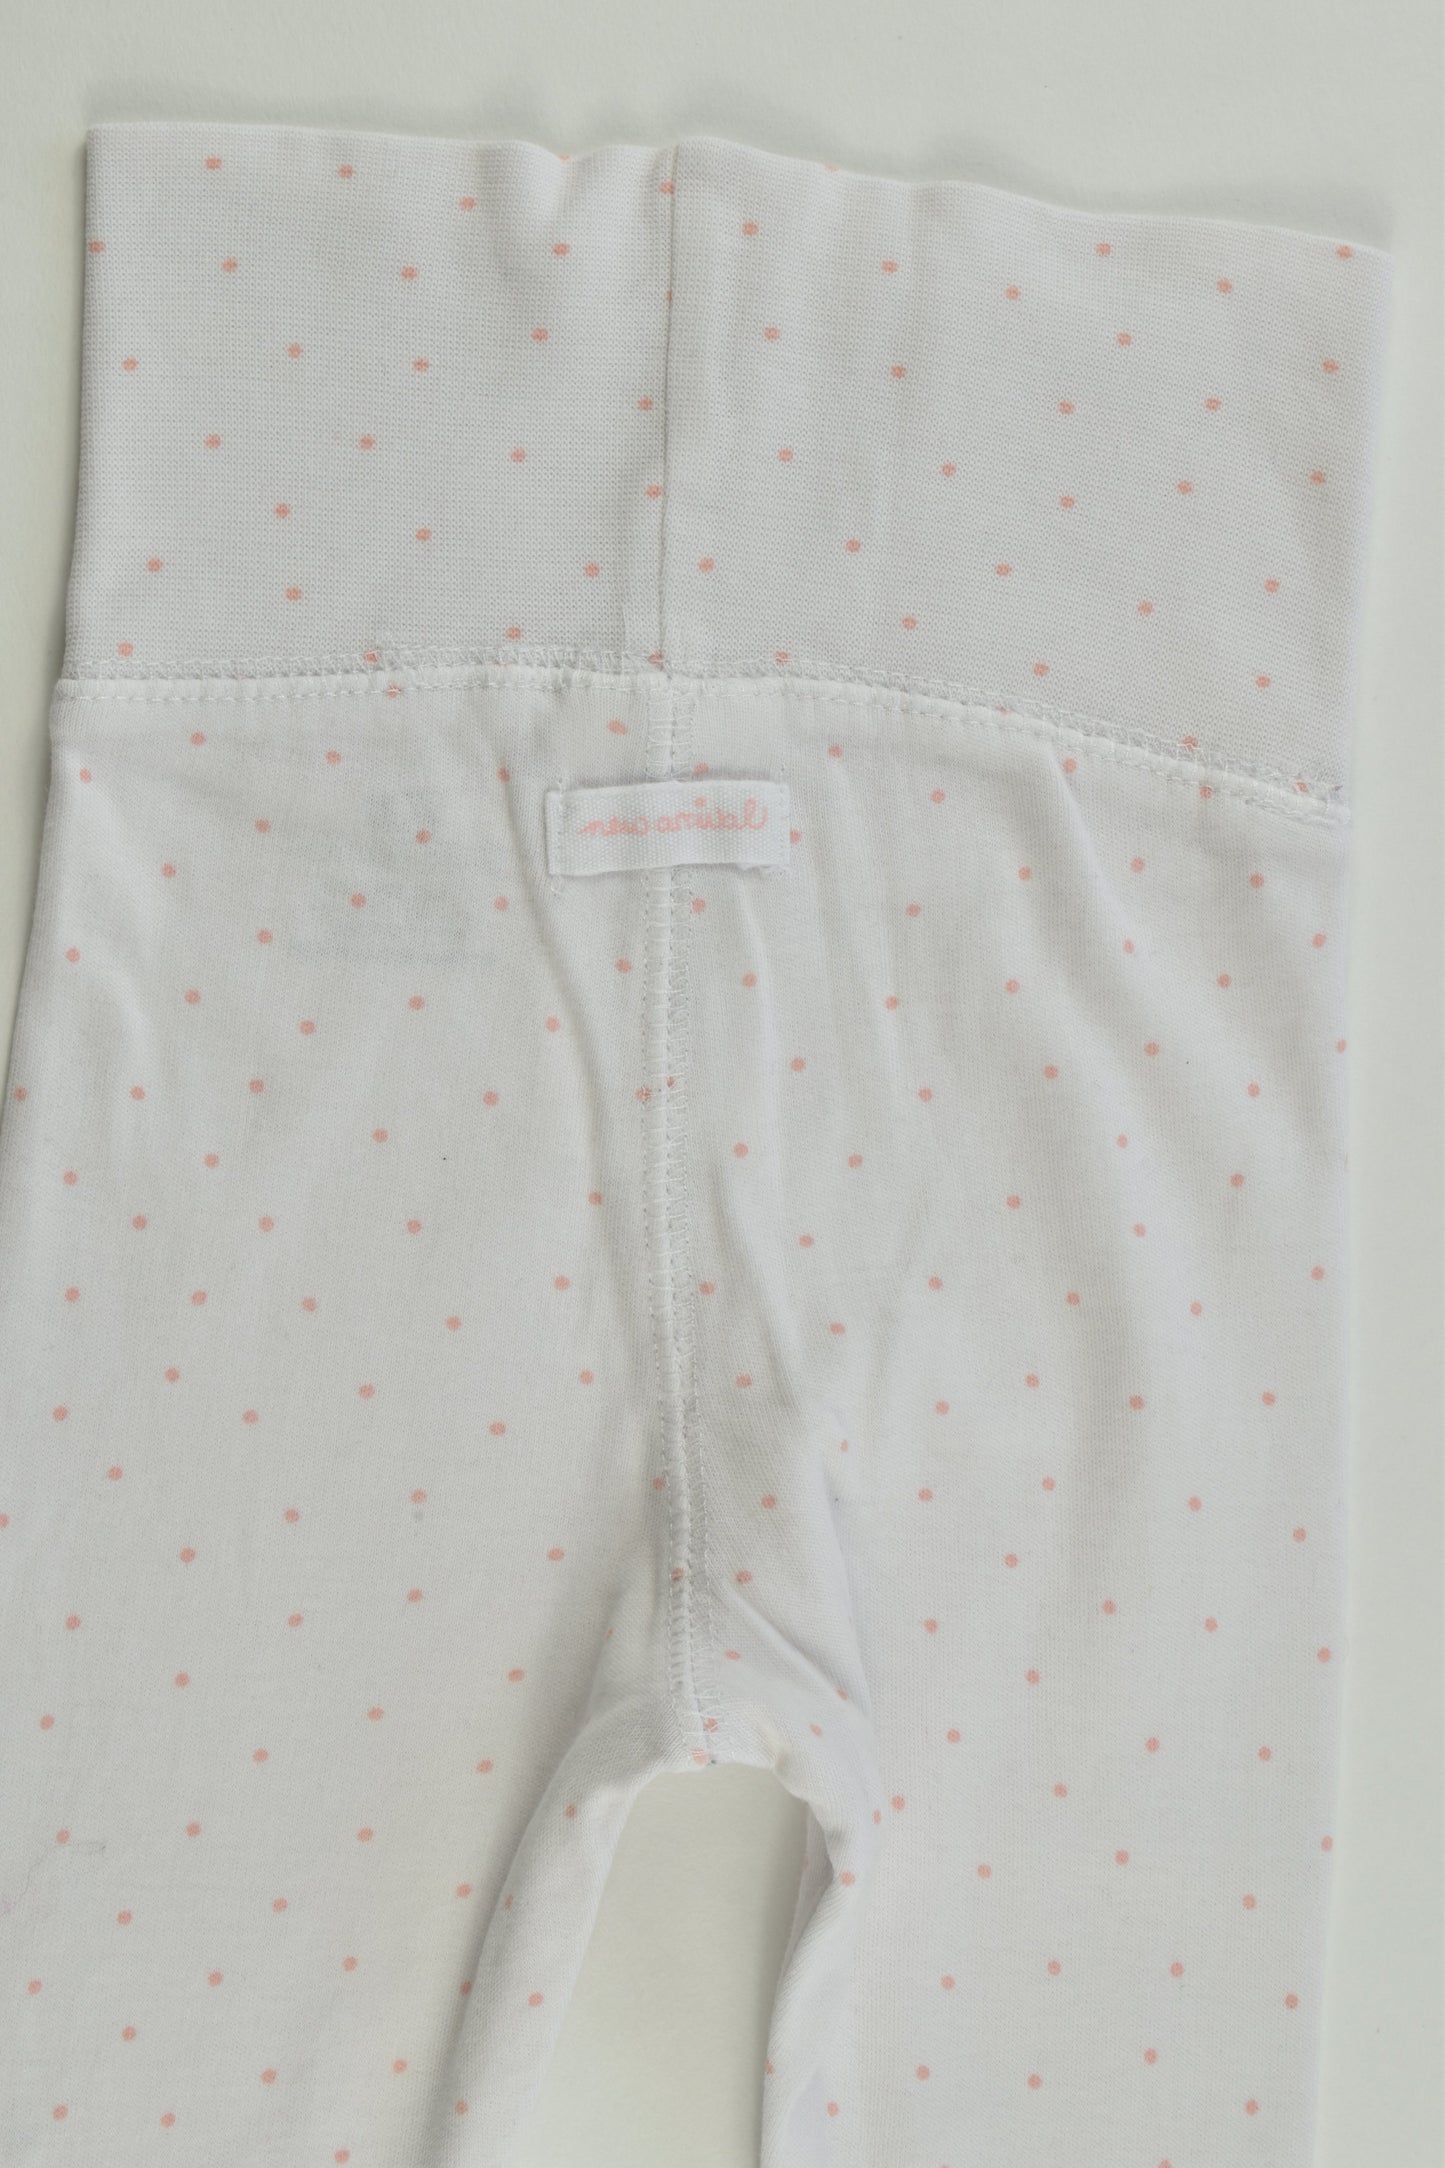 H&M Size 000 (62 cm, 2-4 months) "New Arrival" Dotted Footed Pants